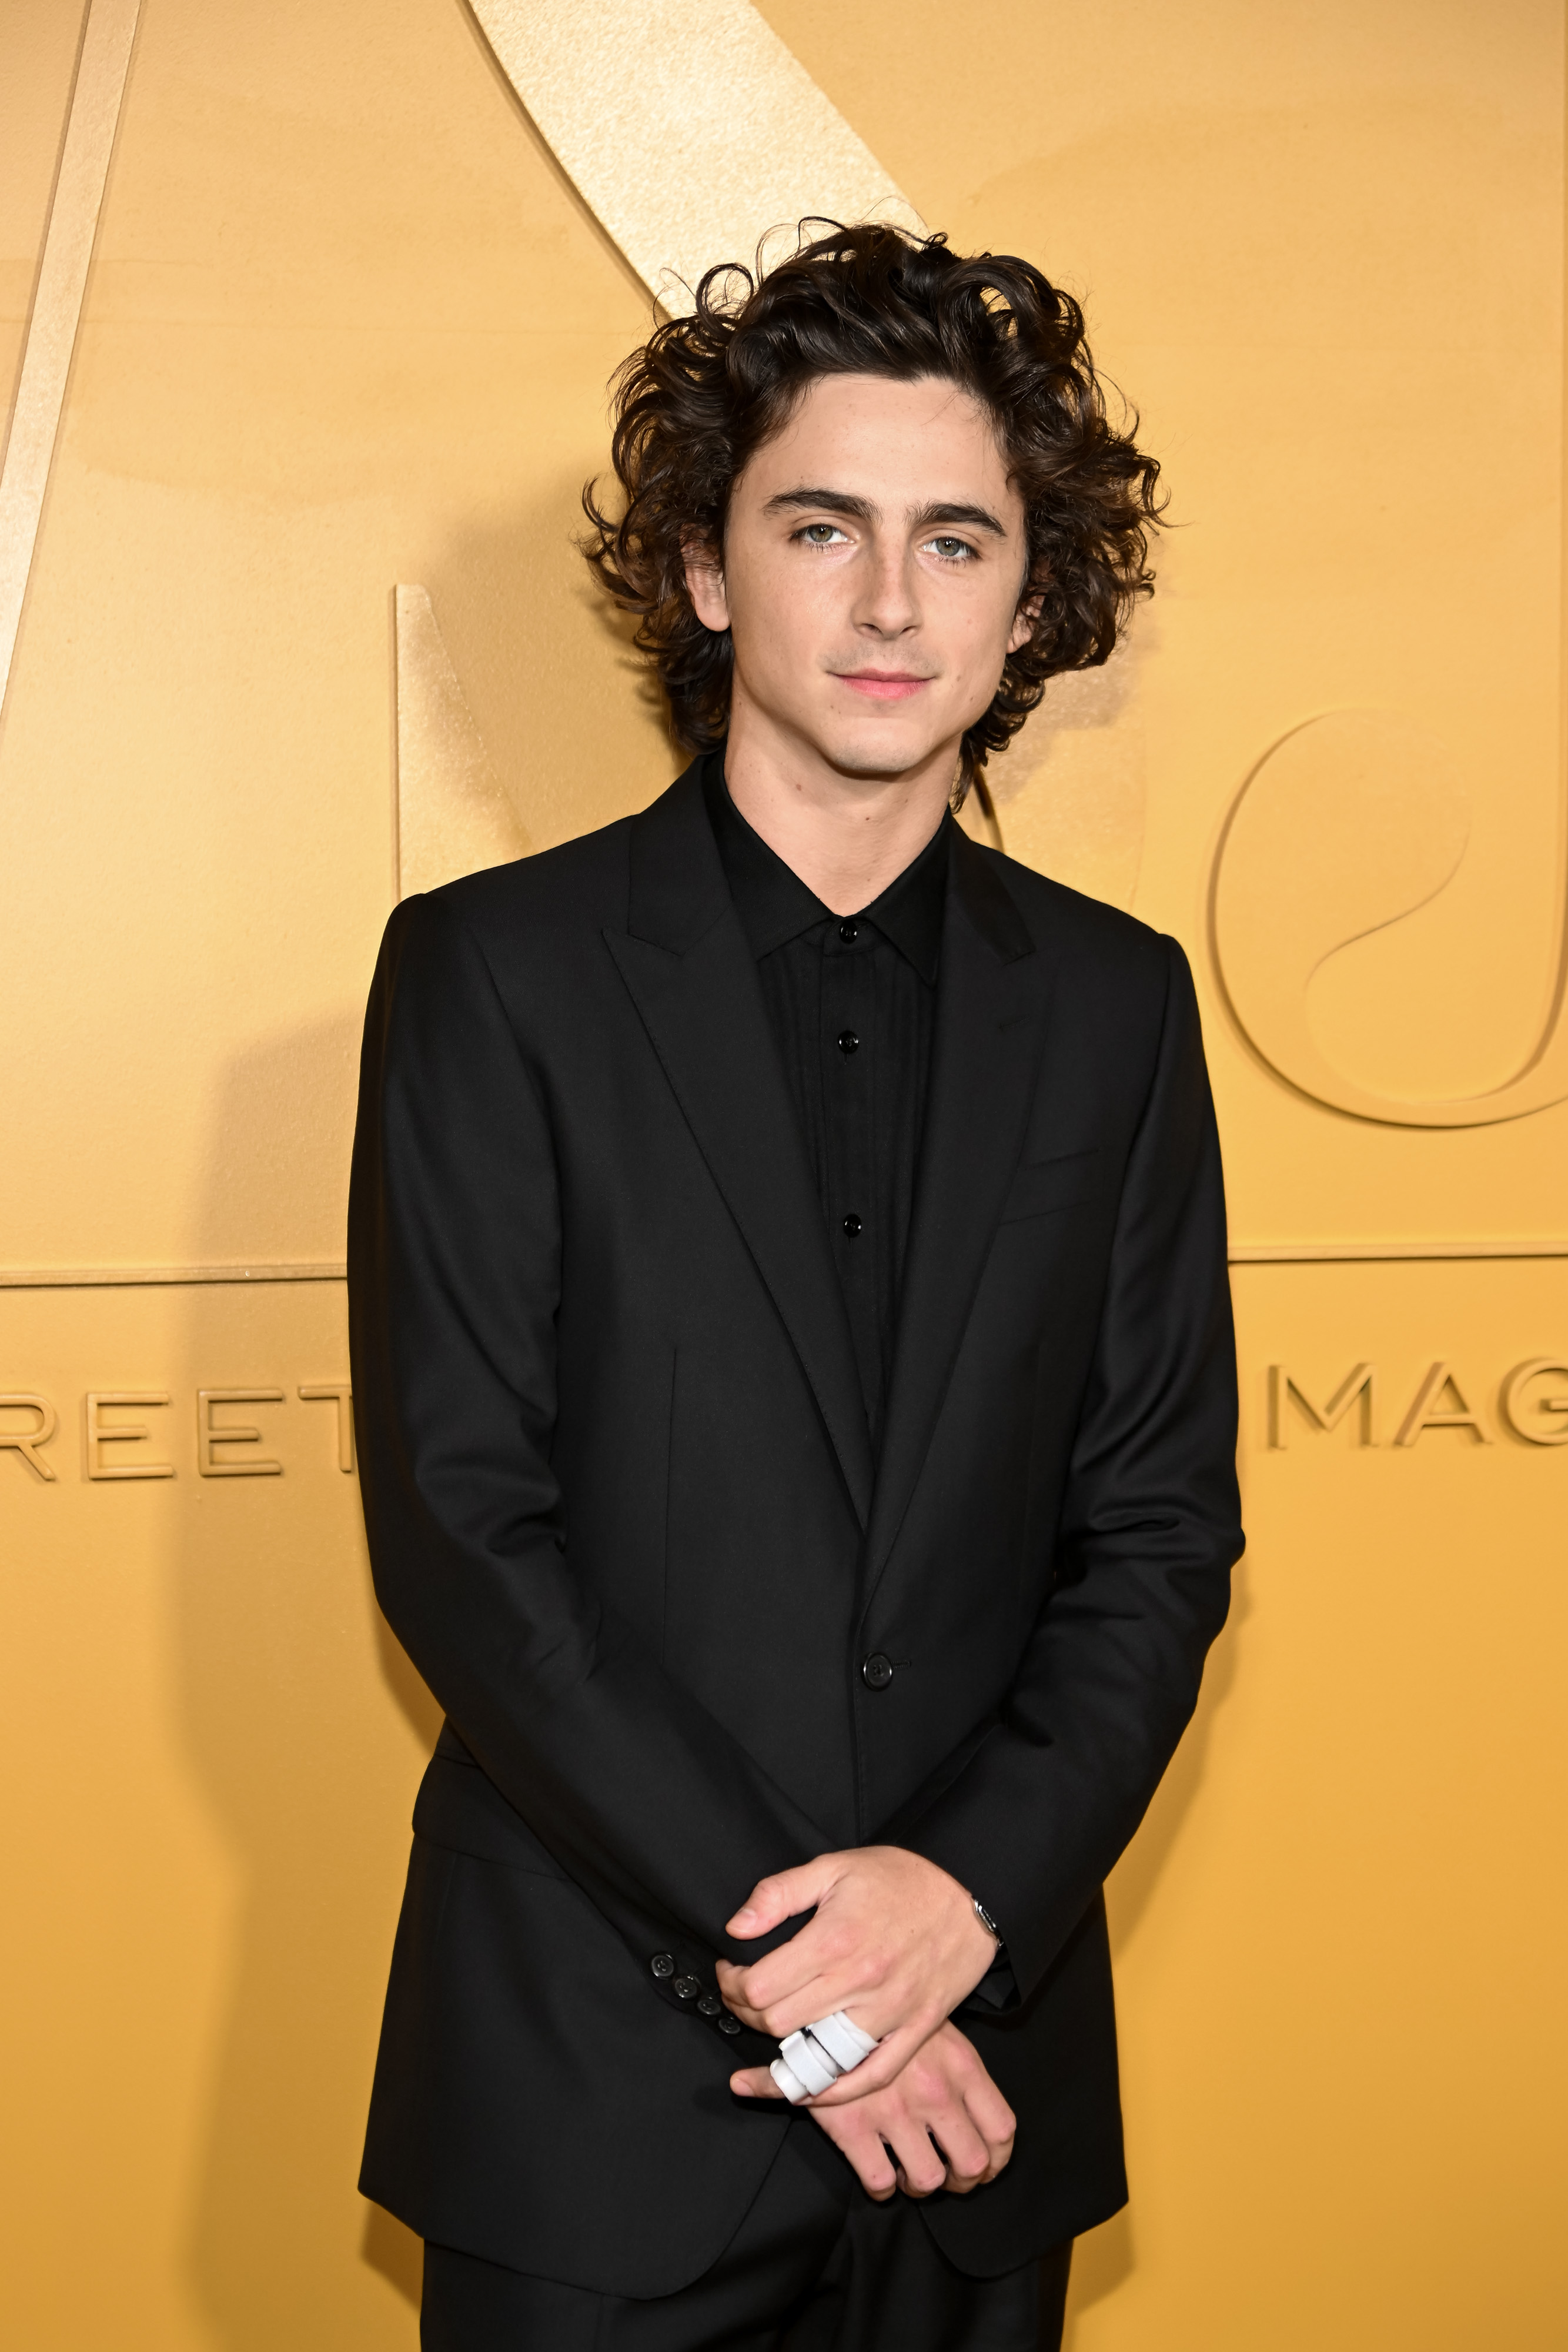 The star's boyfriend, Timothee Chalamet also attended the event